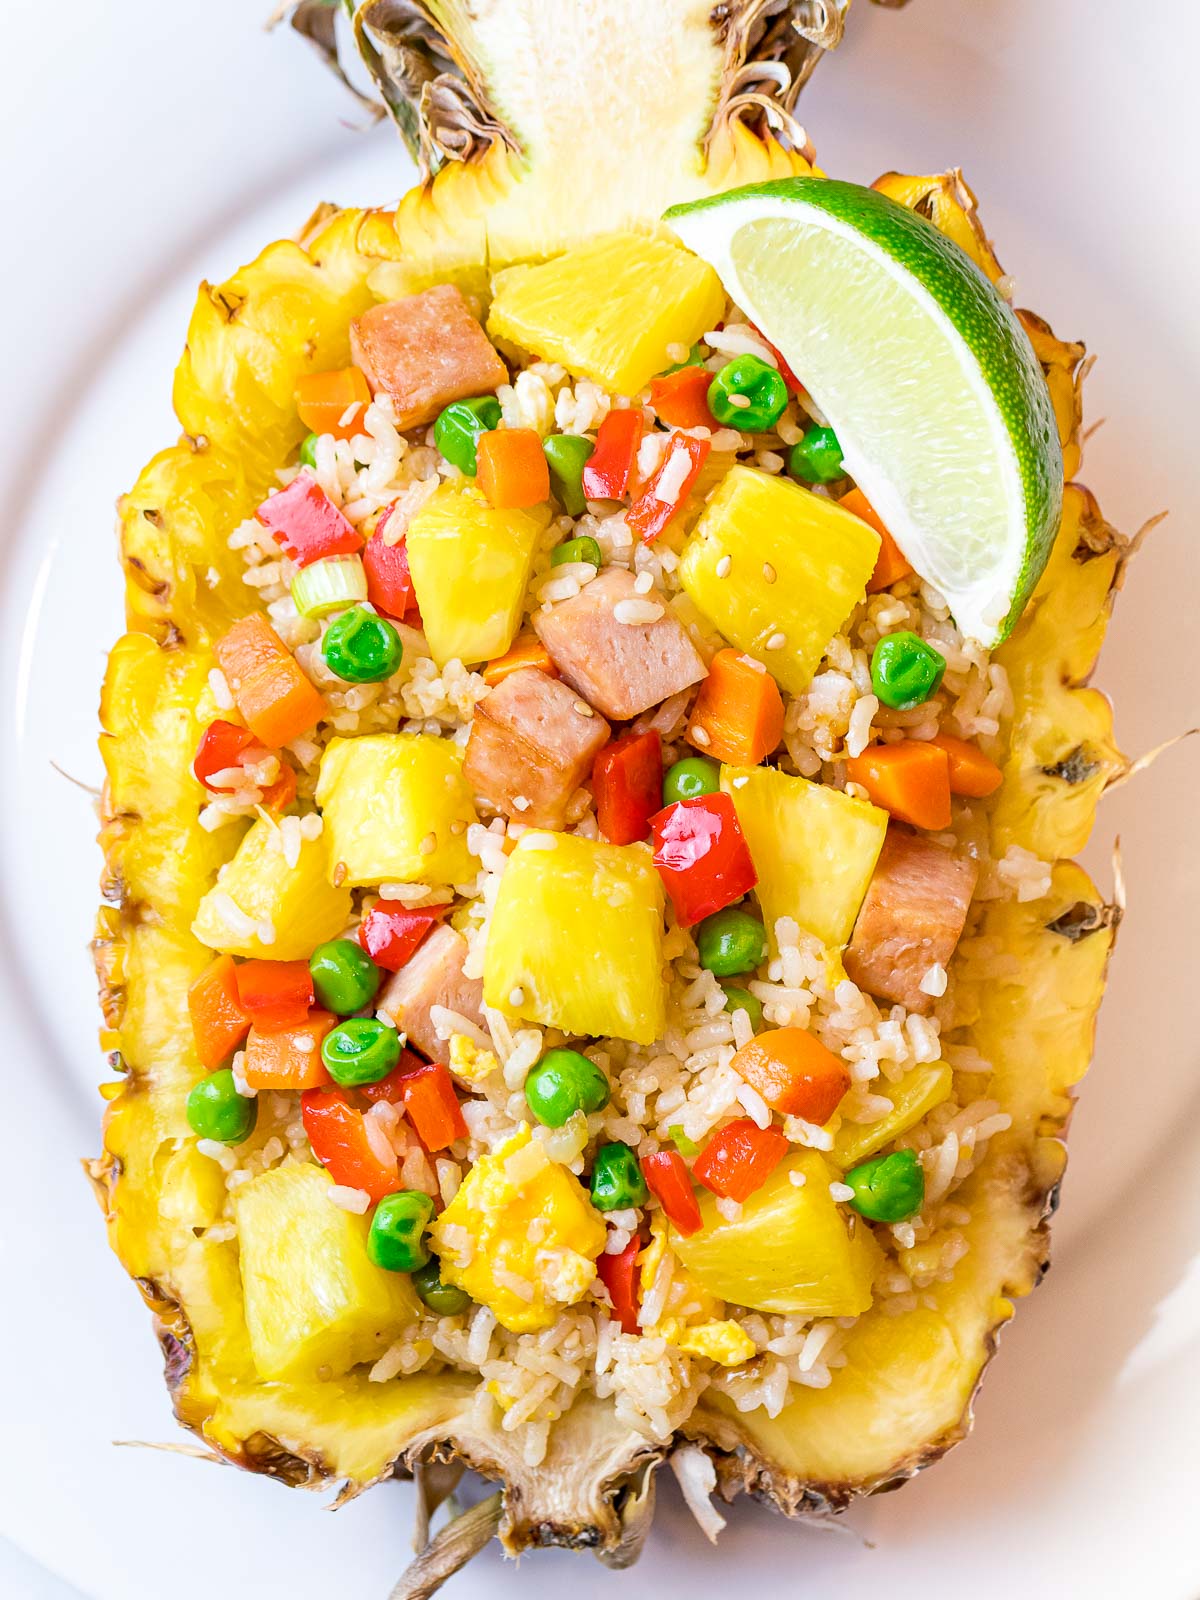 Hawaiian pineapple fried rice with spam in a pineapple boat